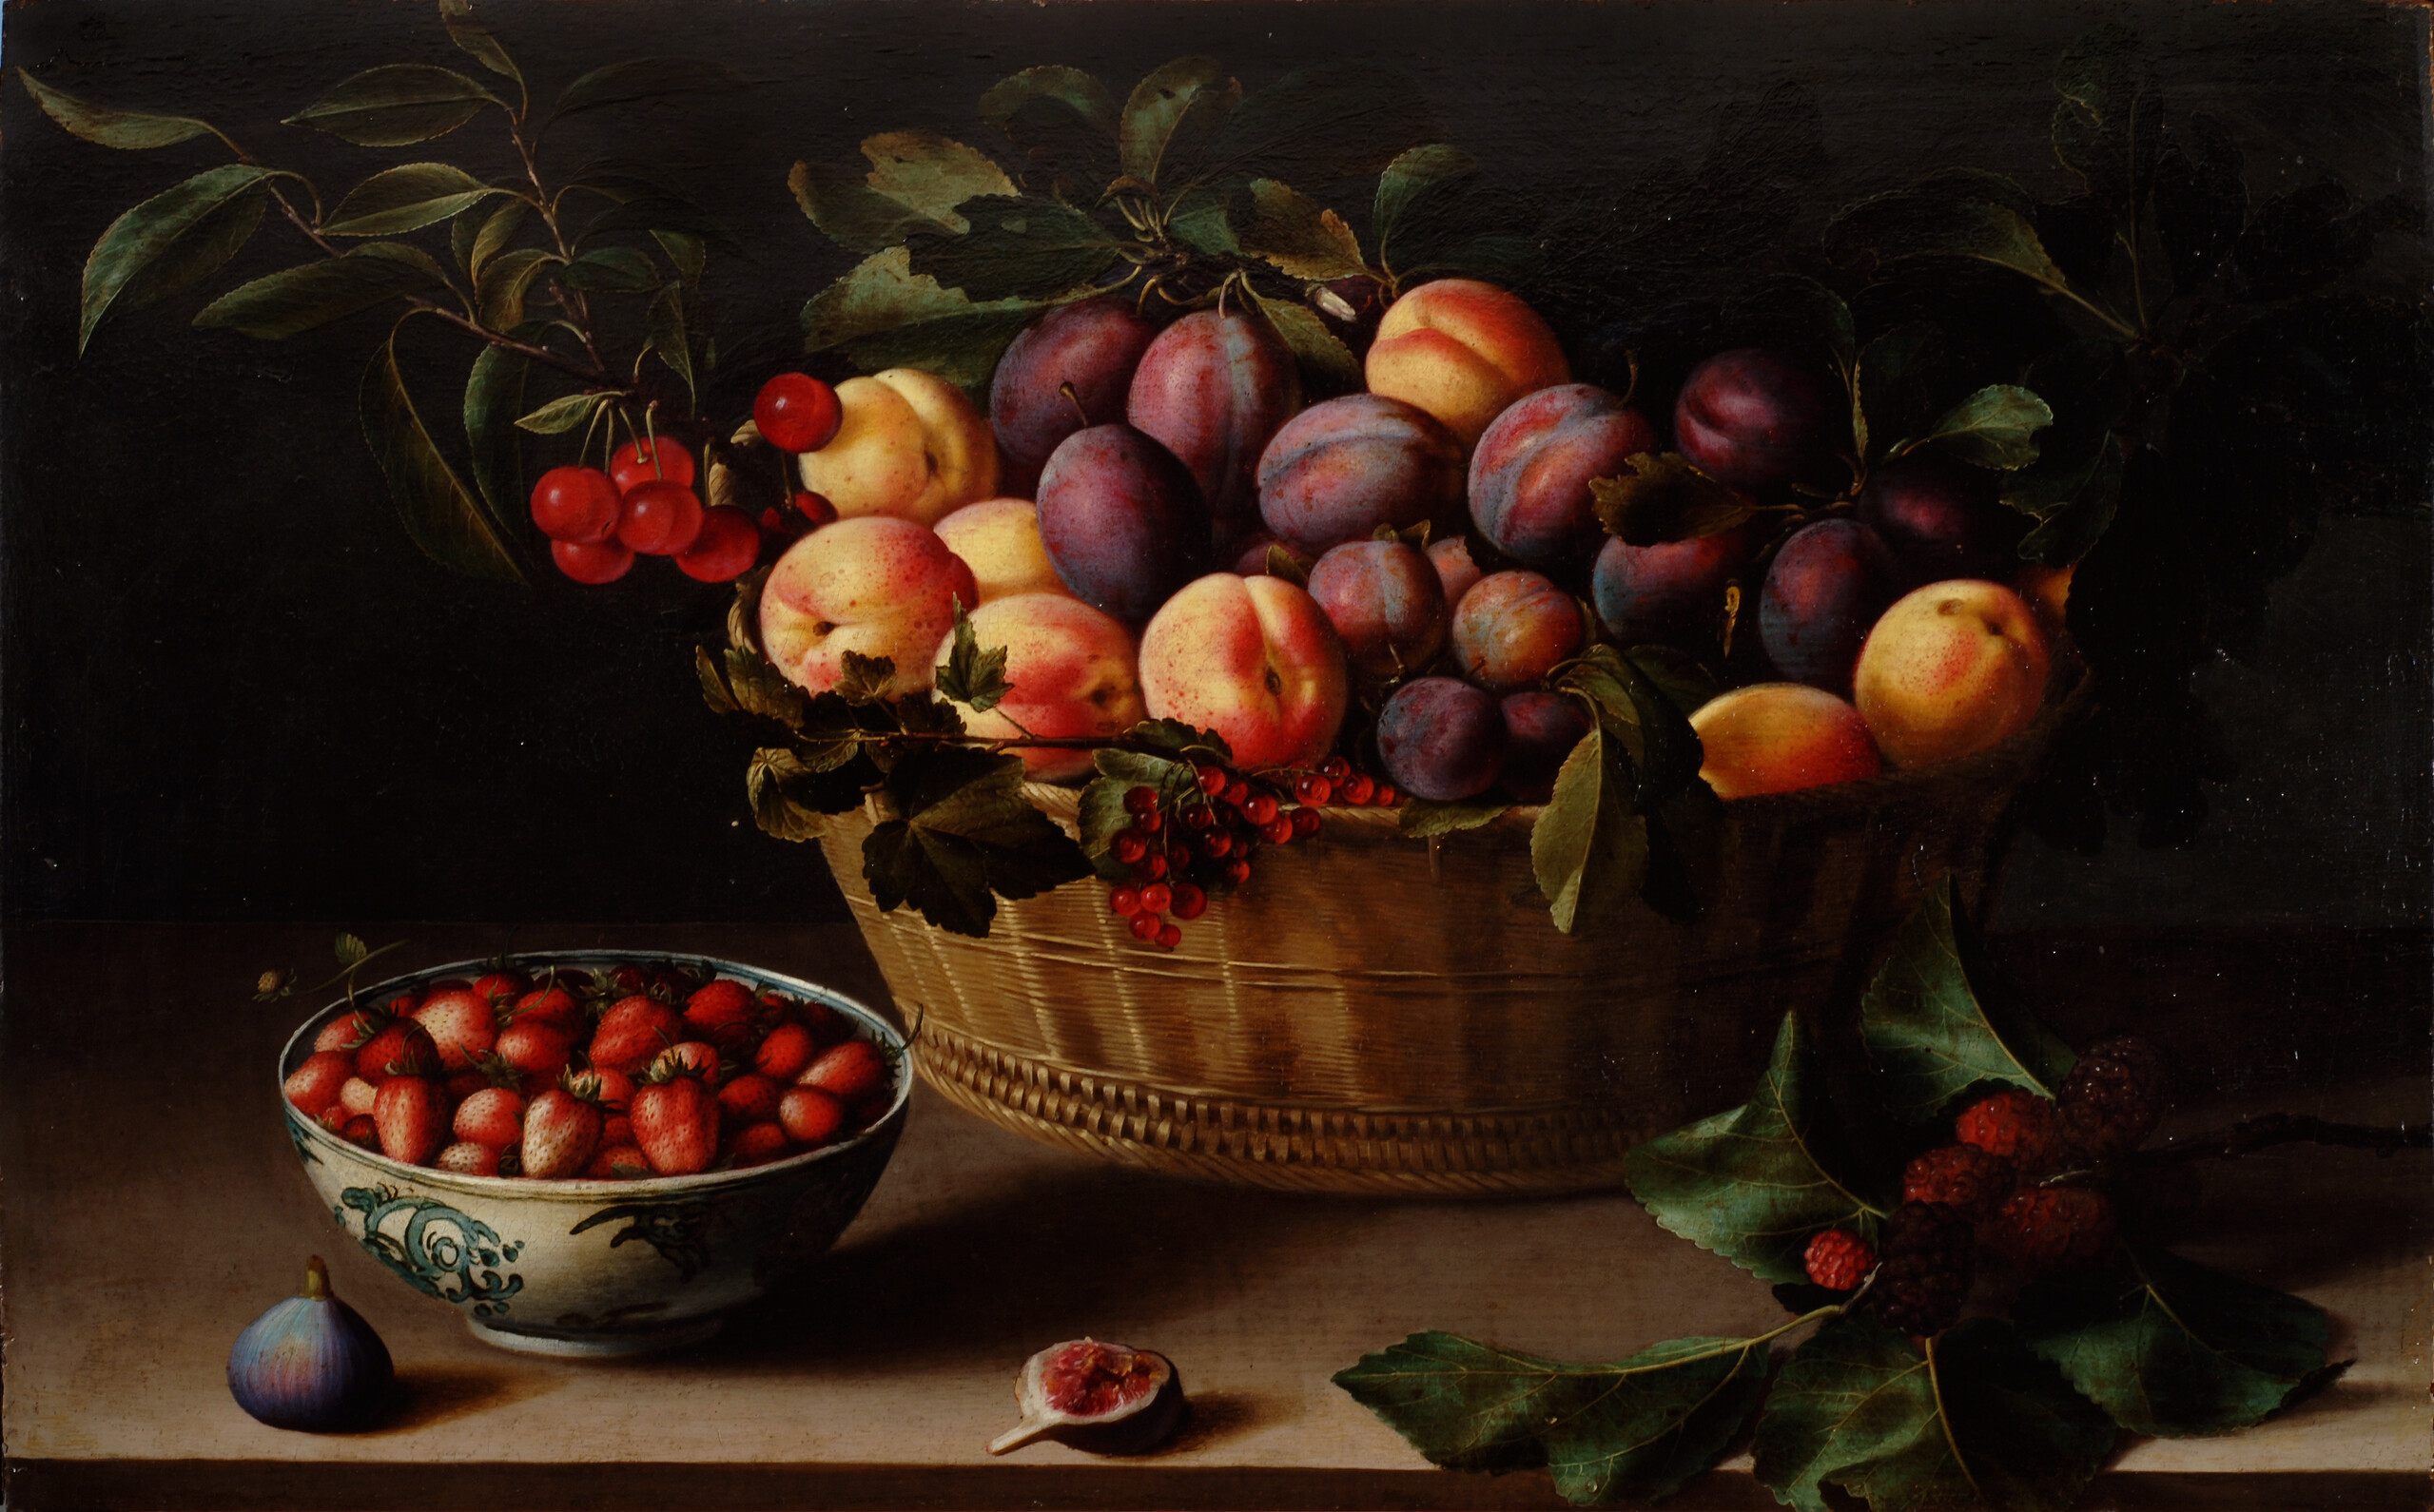 A brightly lit basket of peaches and plums on a ledge against a dark background. To the left of the basket is a blue and white porcelain bowl filled with strawberries. A whole fig sits next to it. In front of the basket is half of a fig and to the right a branch with leaves and red berries.